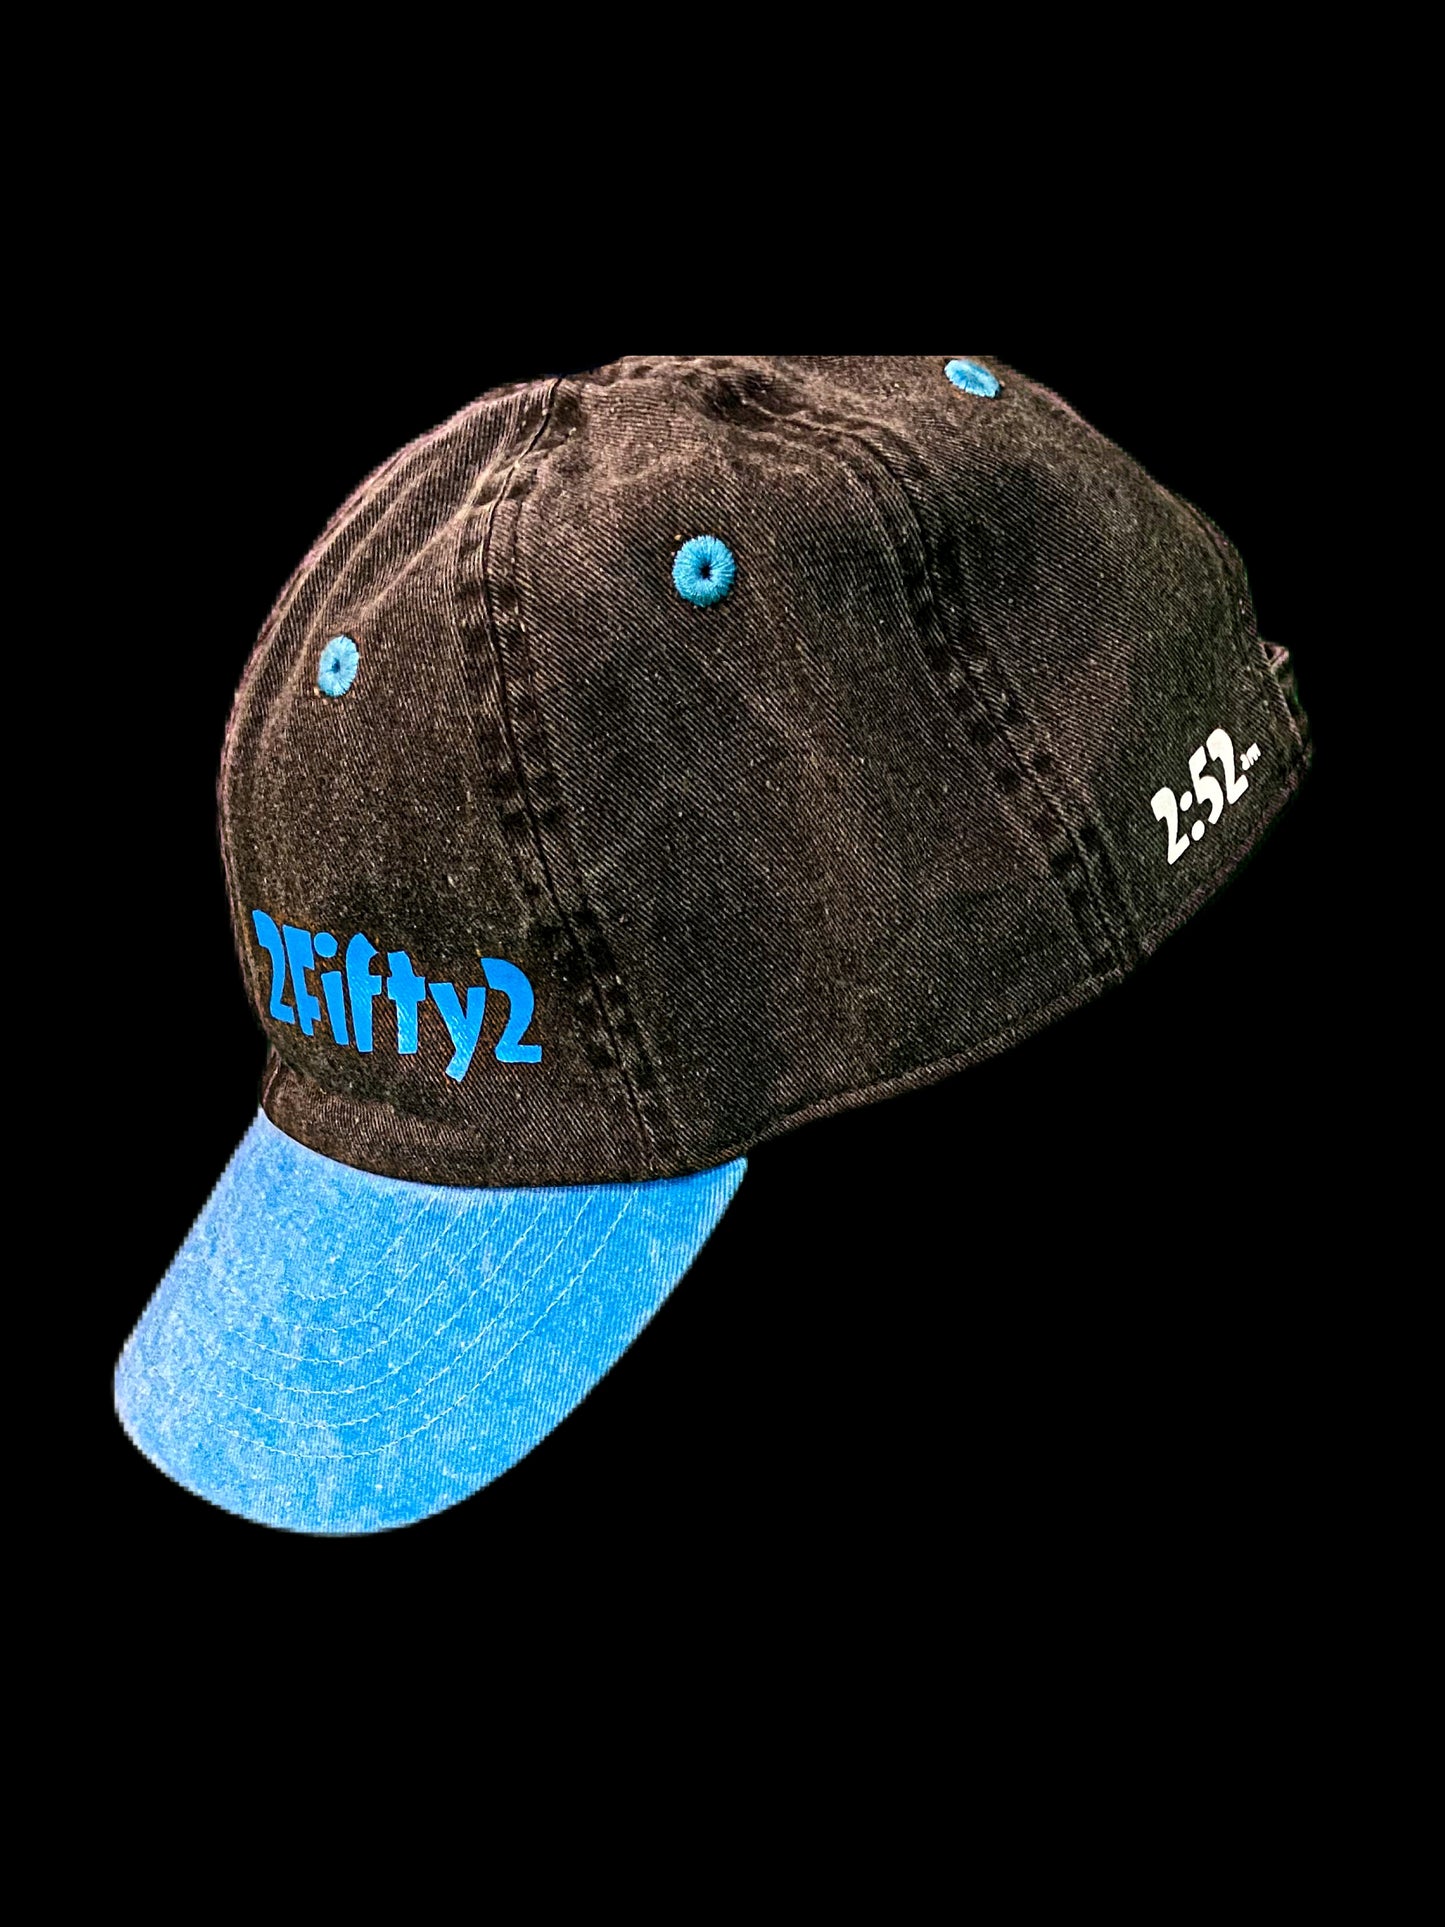 Dad hat ( black and blue) - 2fifty2